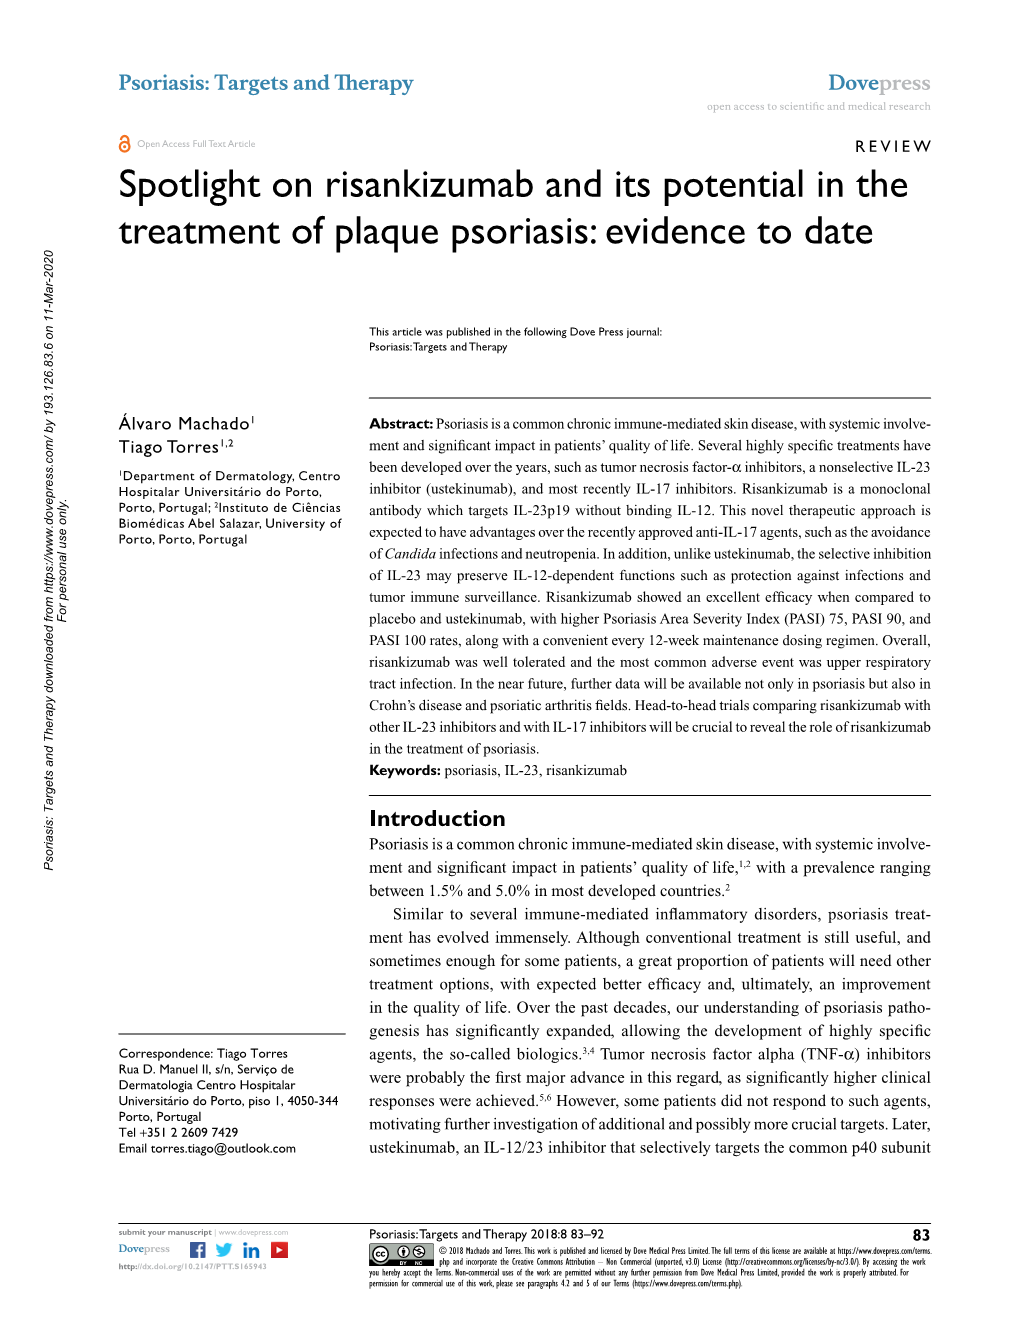 Spotlight on Risankizumab and Its Potential in the Treatment of Plaque Psoriasis: Evidence to Date